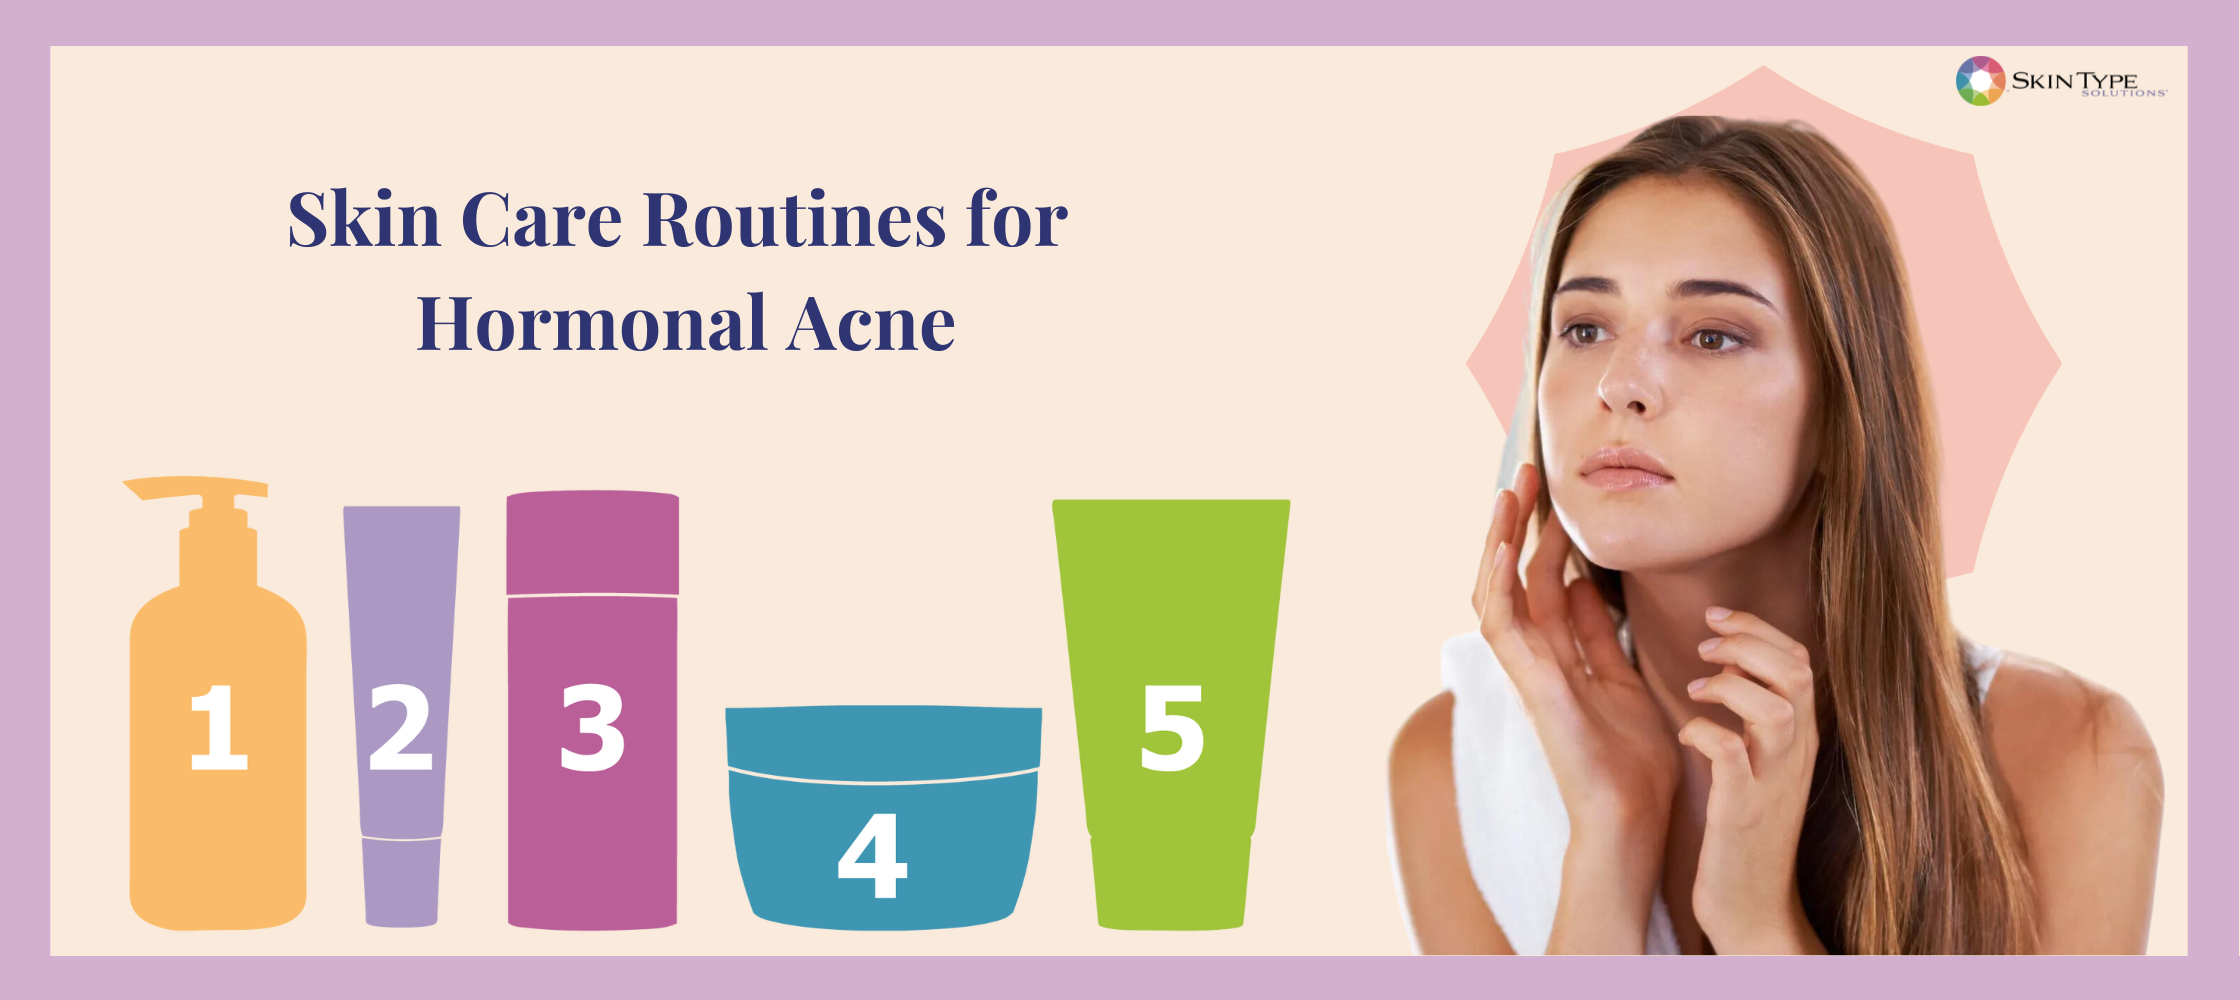 https://cdn.shopify.com/s/files/1/0740/5984/1838/t/13/assets/hormonal-acne-skin-care-routine-1-1691831822304.png?v=1691831825